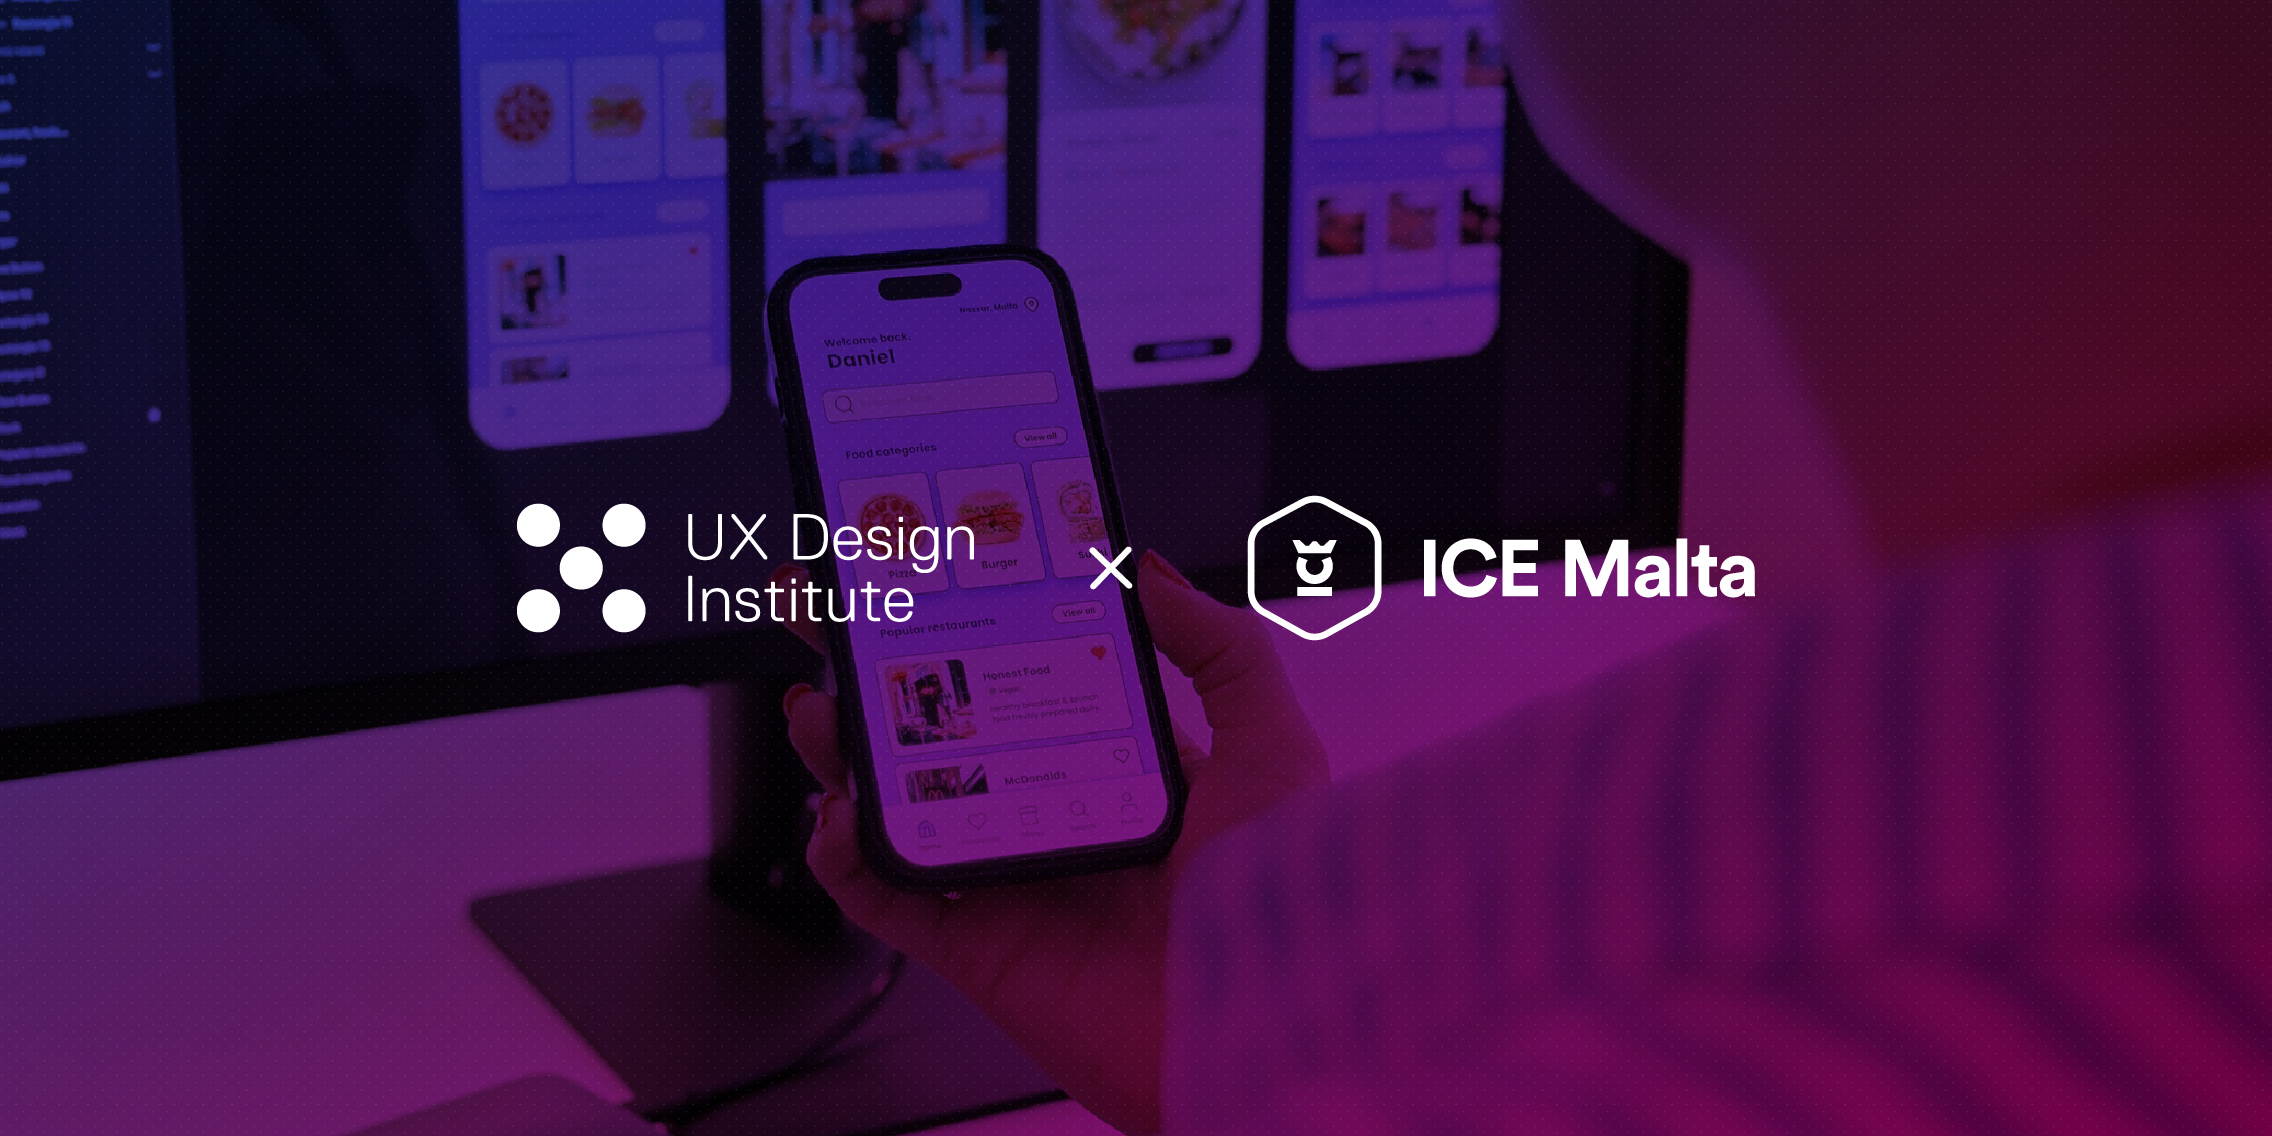 Illustration with logos of ICE Malta and UXDI